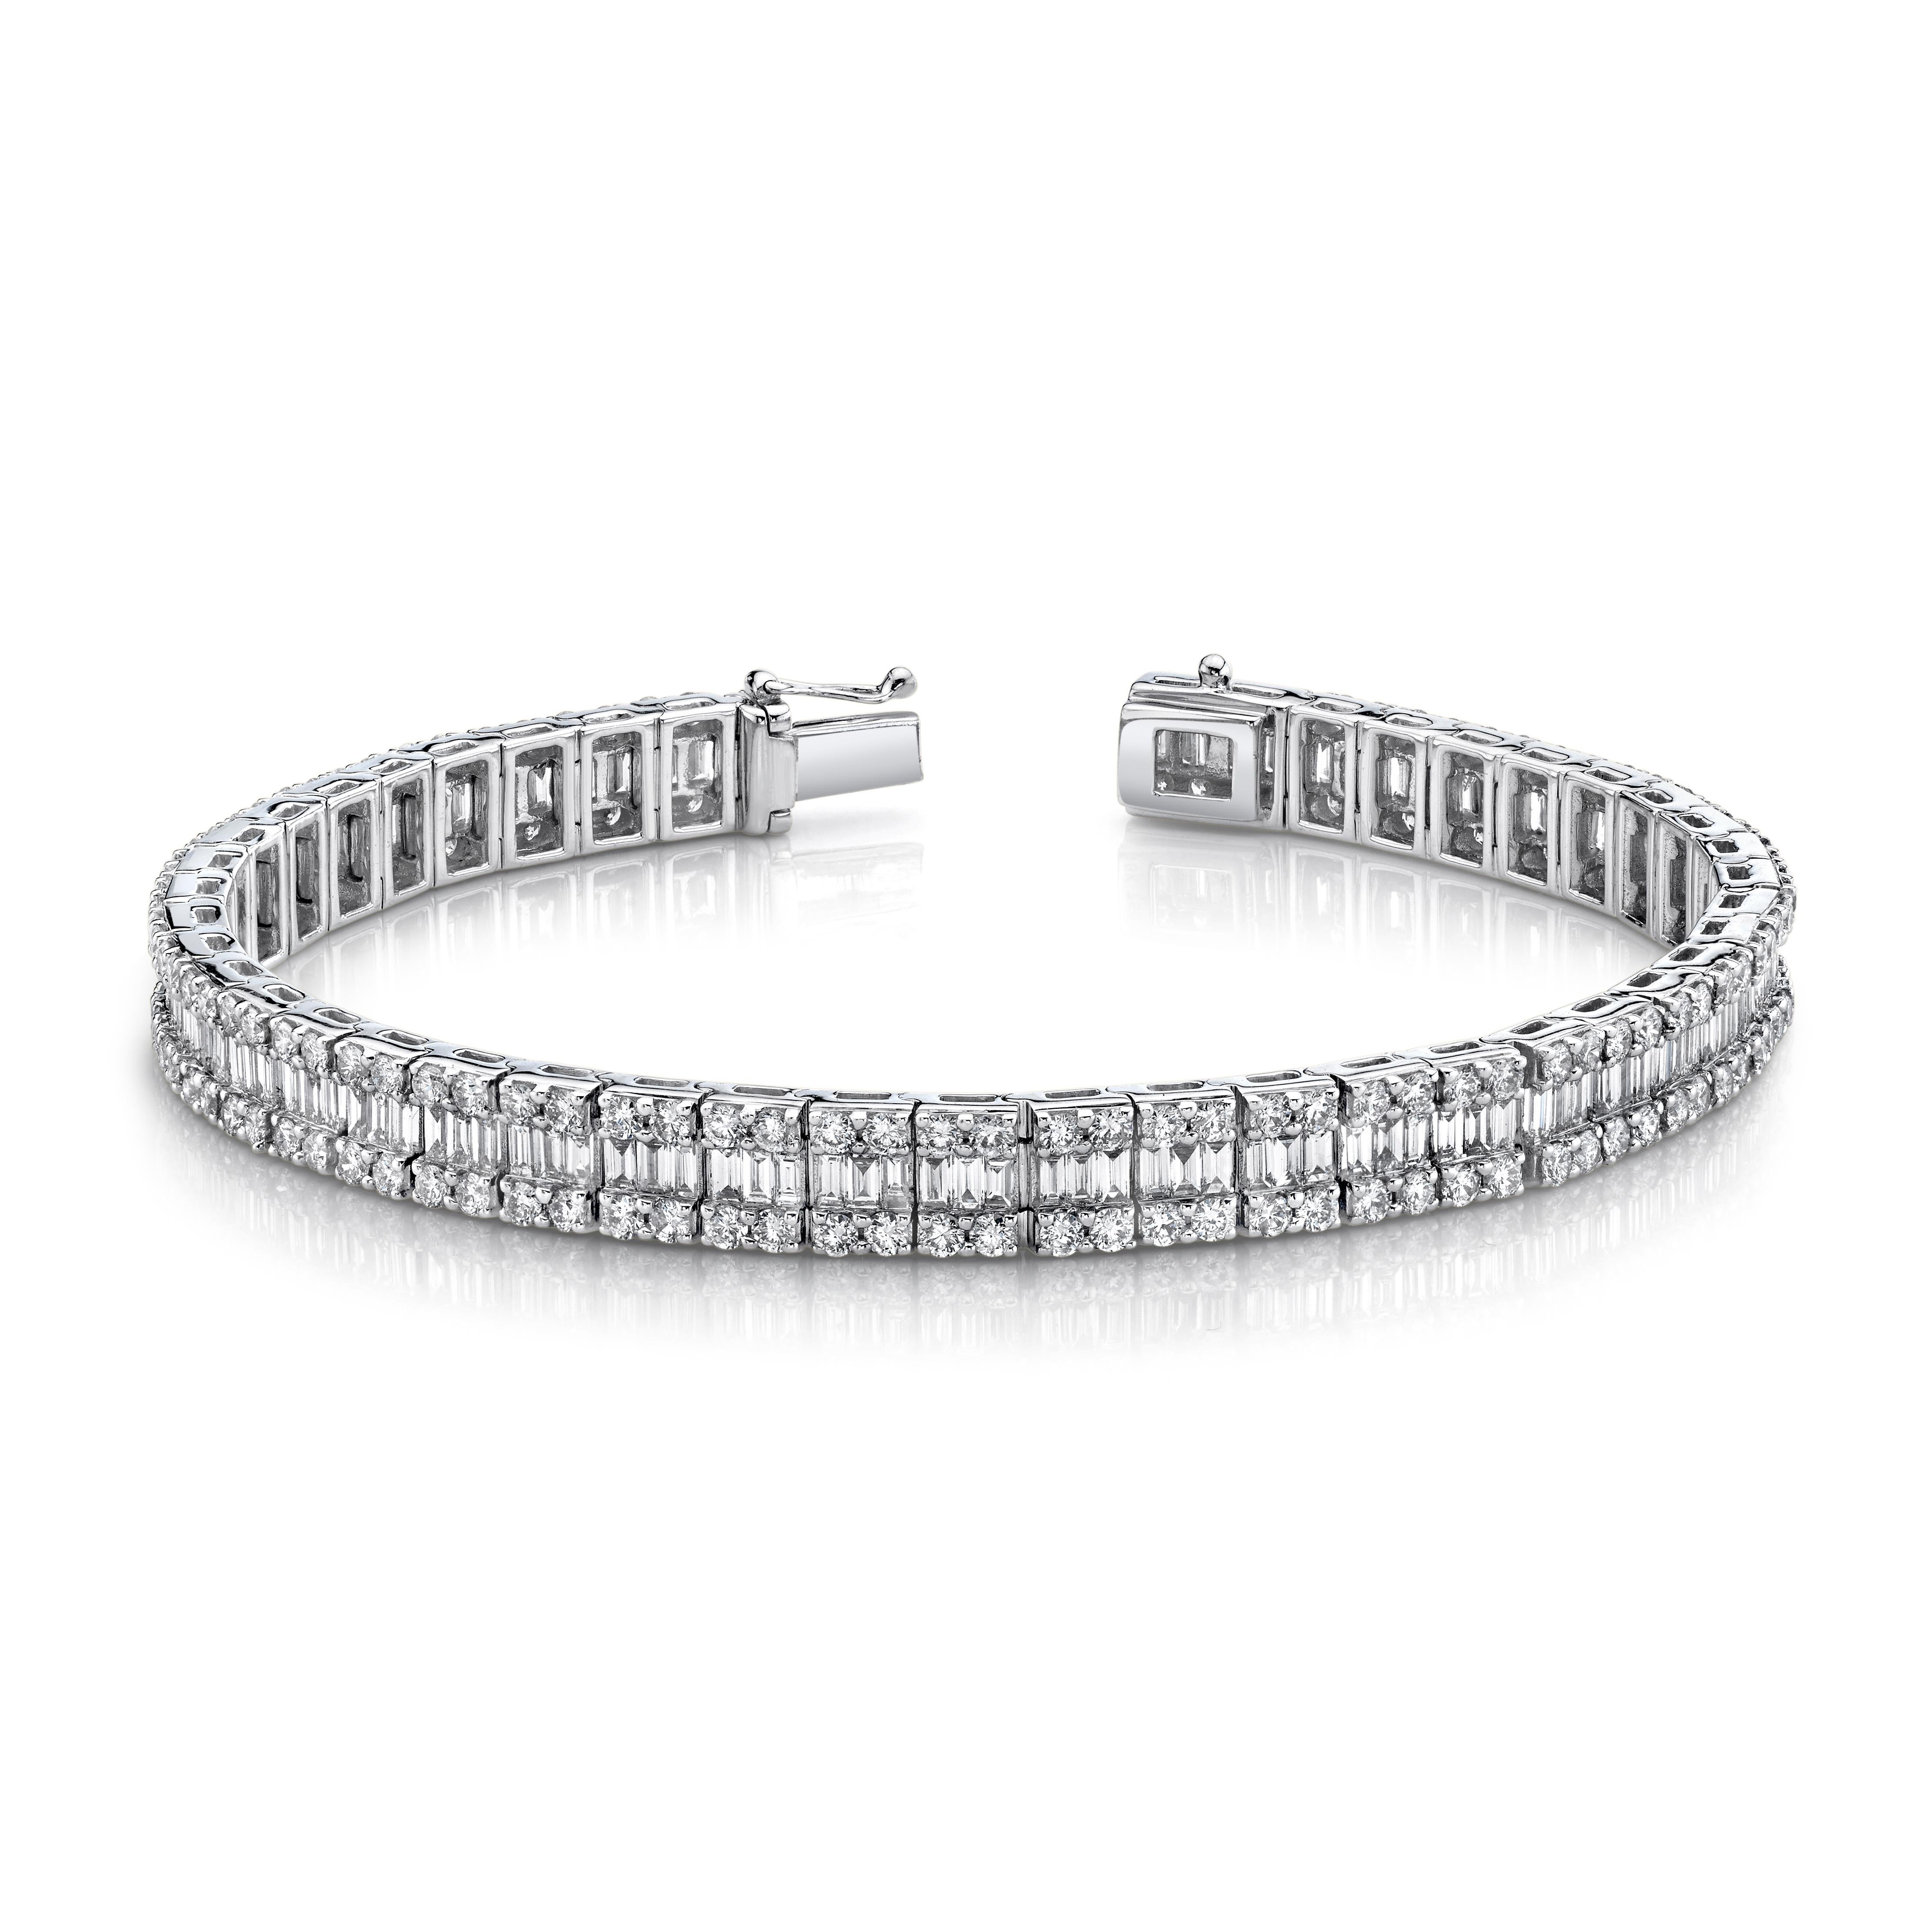 This magnificent diamond tennis bracelet features over 3 carats of baguette cut diamonds and over 4 carats of round brilliant cut diamonds set in 18k white gold. The center 